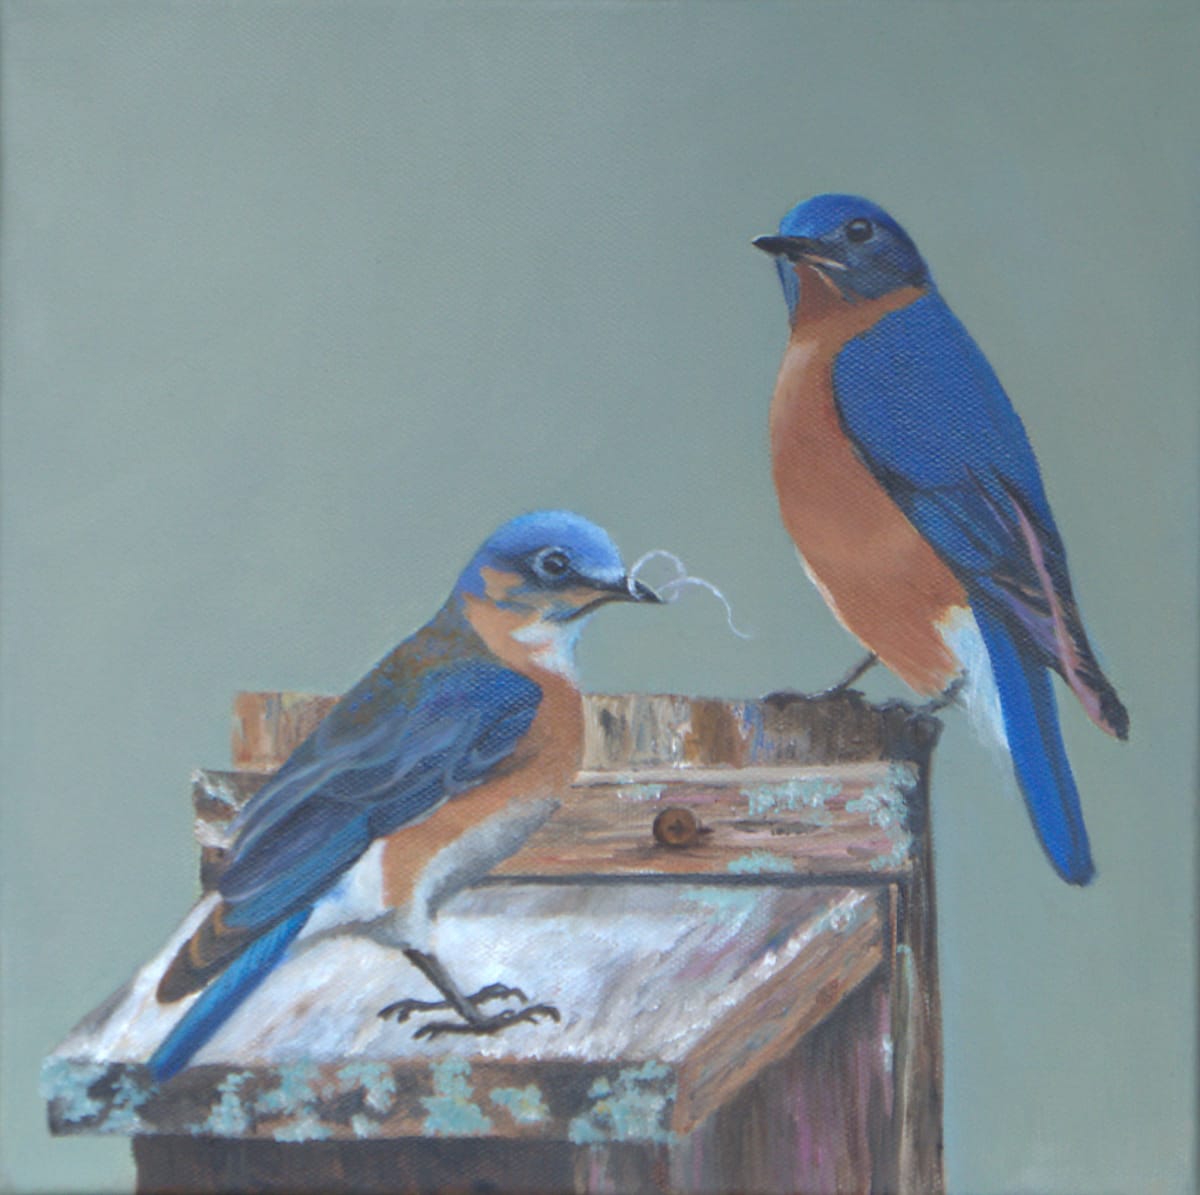 HOME SWEET HOME by Brenda Francis  Image: Bluebirds are so beautiful!